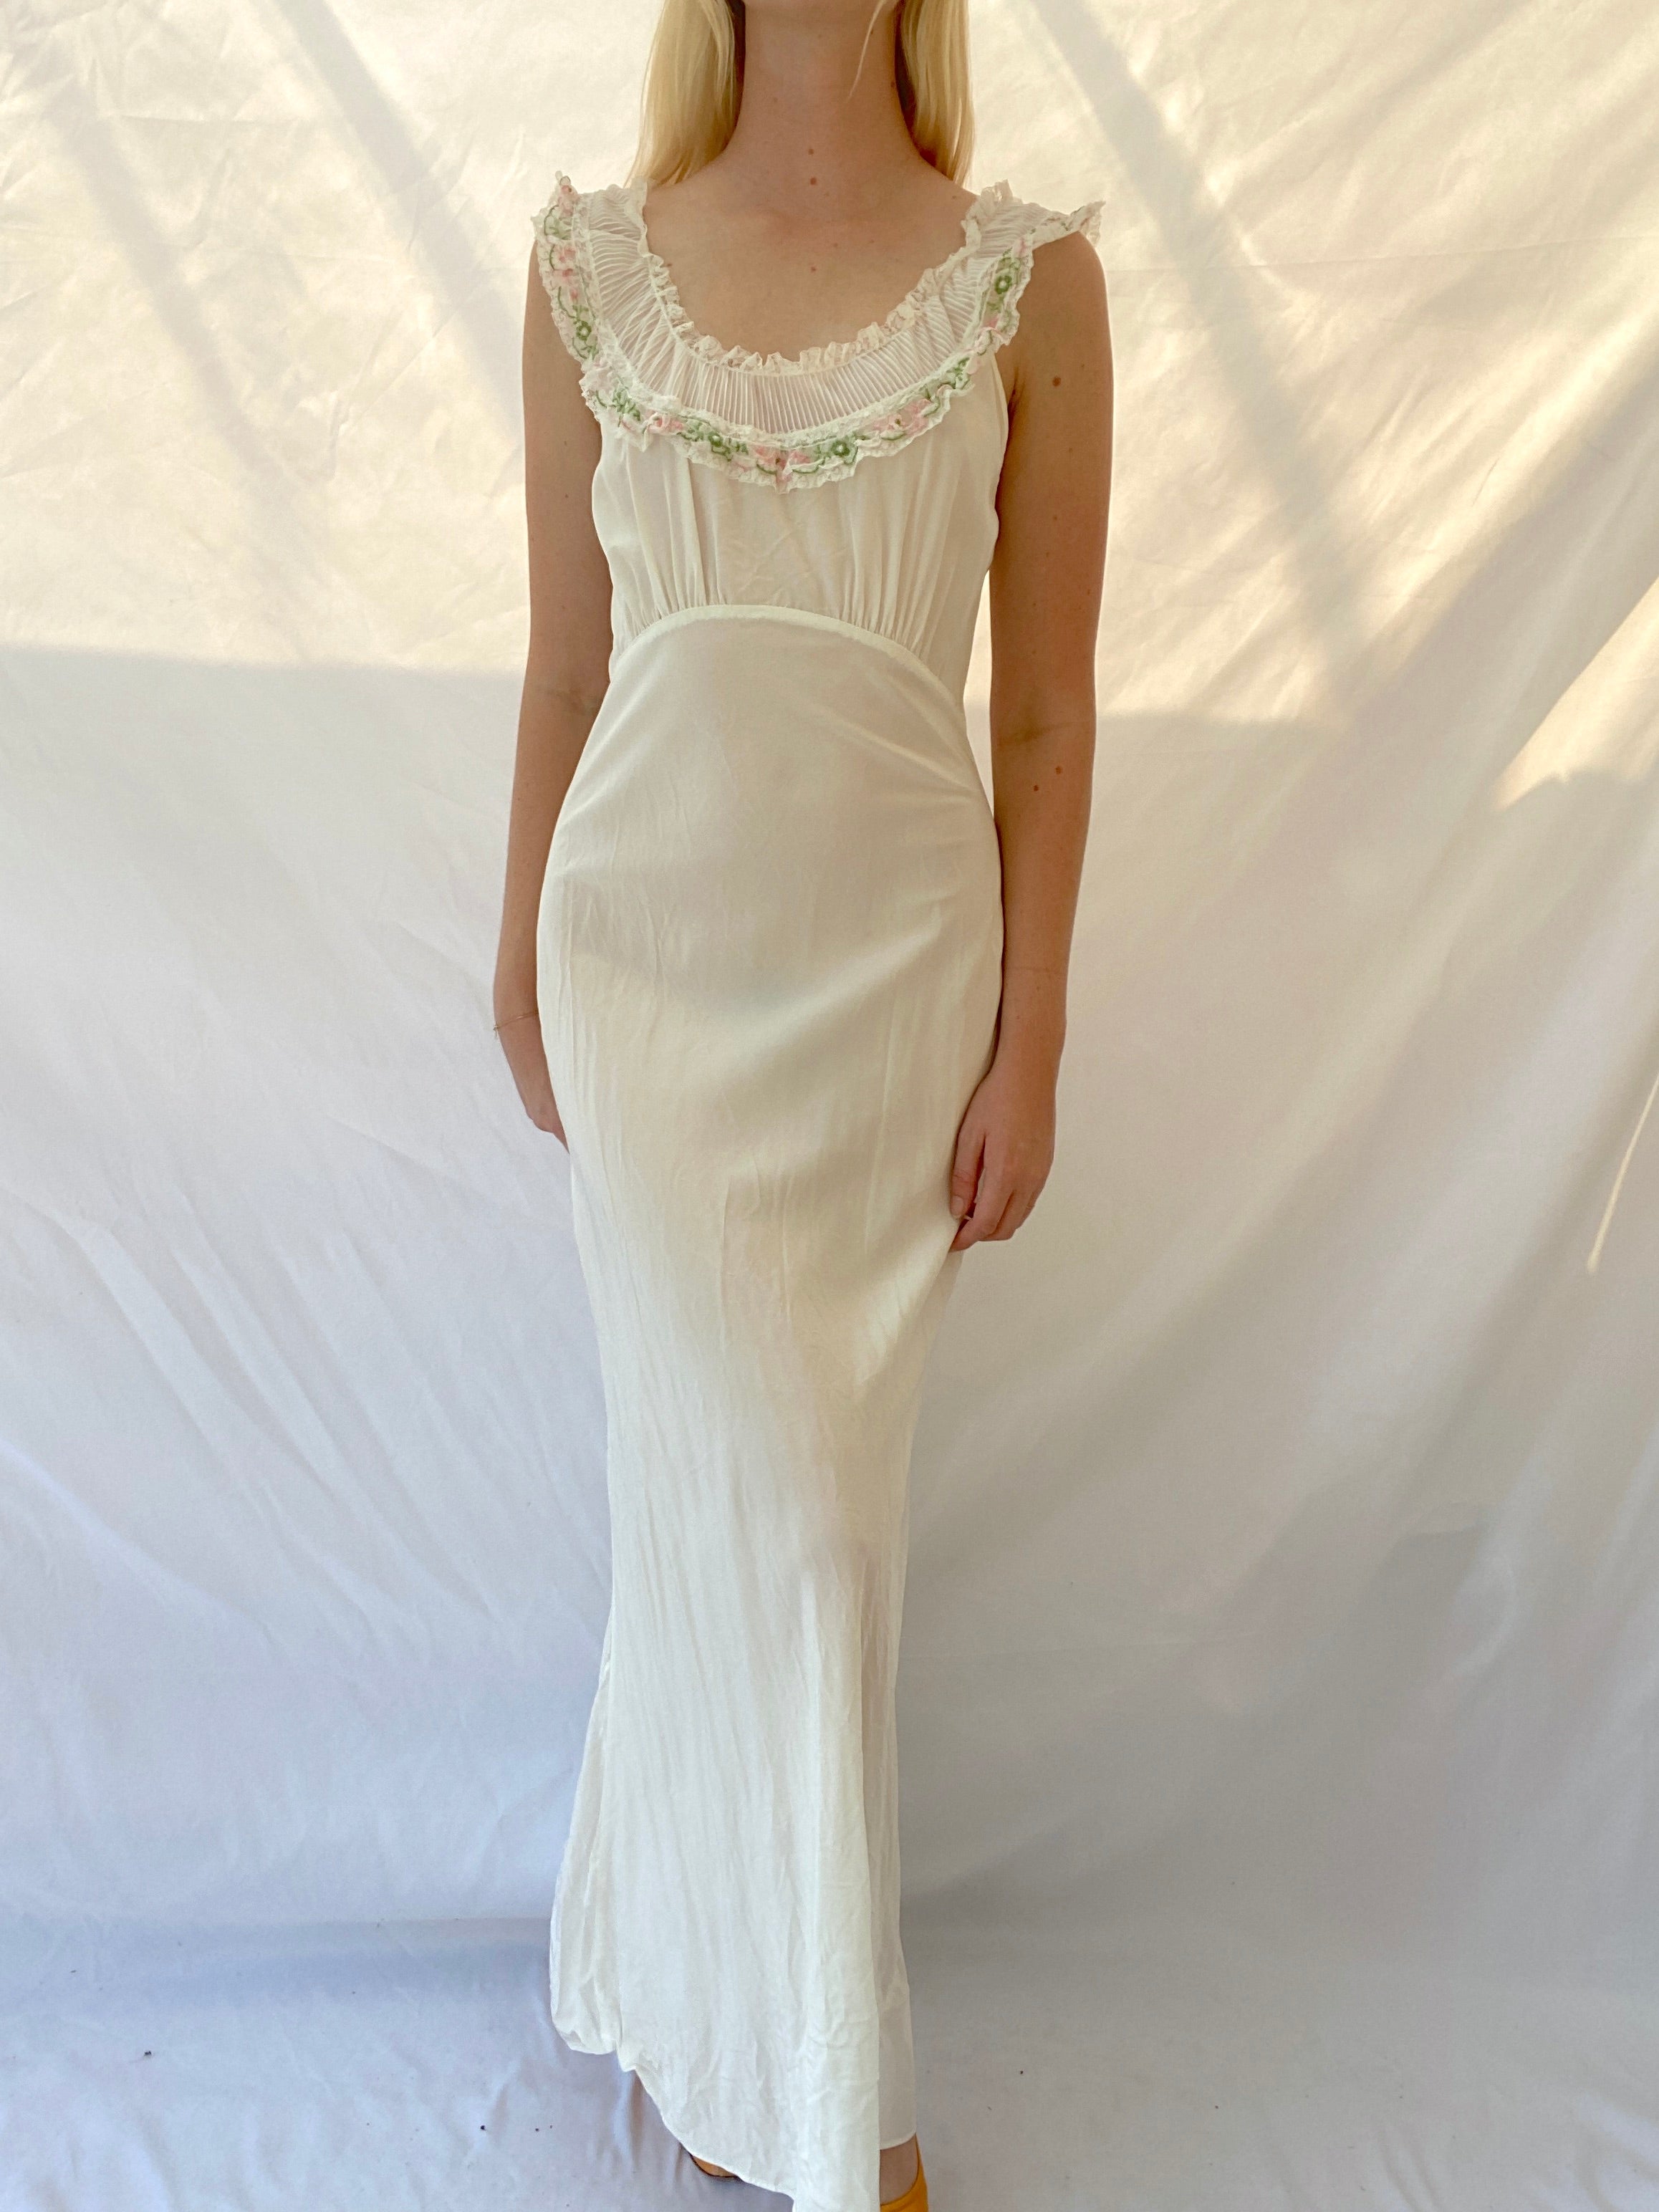 1940's White Slip with Embroidered Ruffle Collar